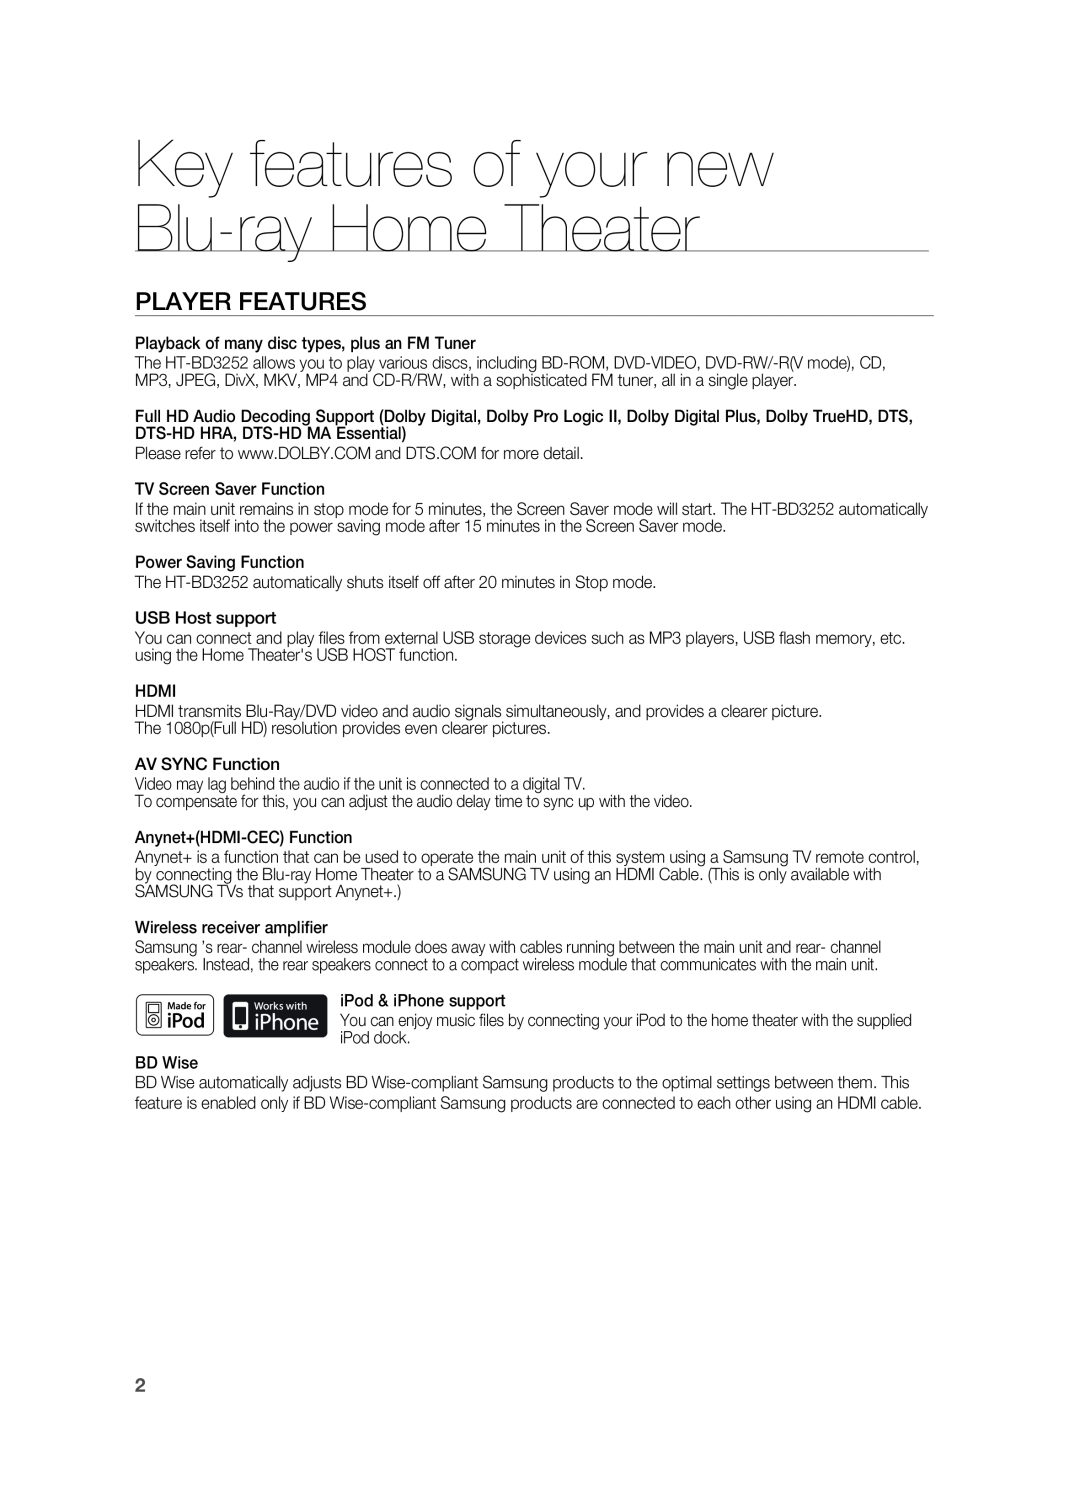 Samsung HT-BD3252 user manual Key features of your new Blu-rayHome Theater, Player Features 